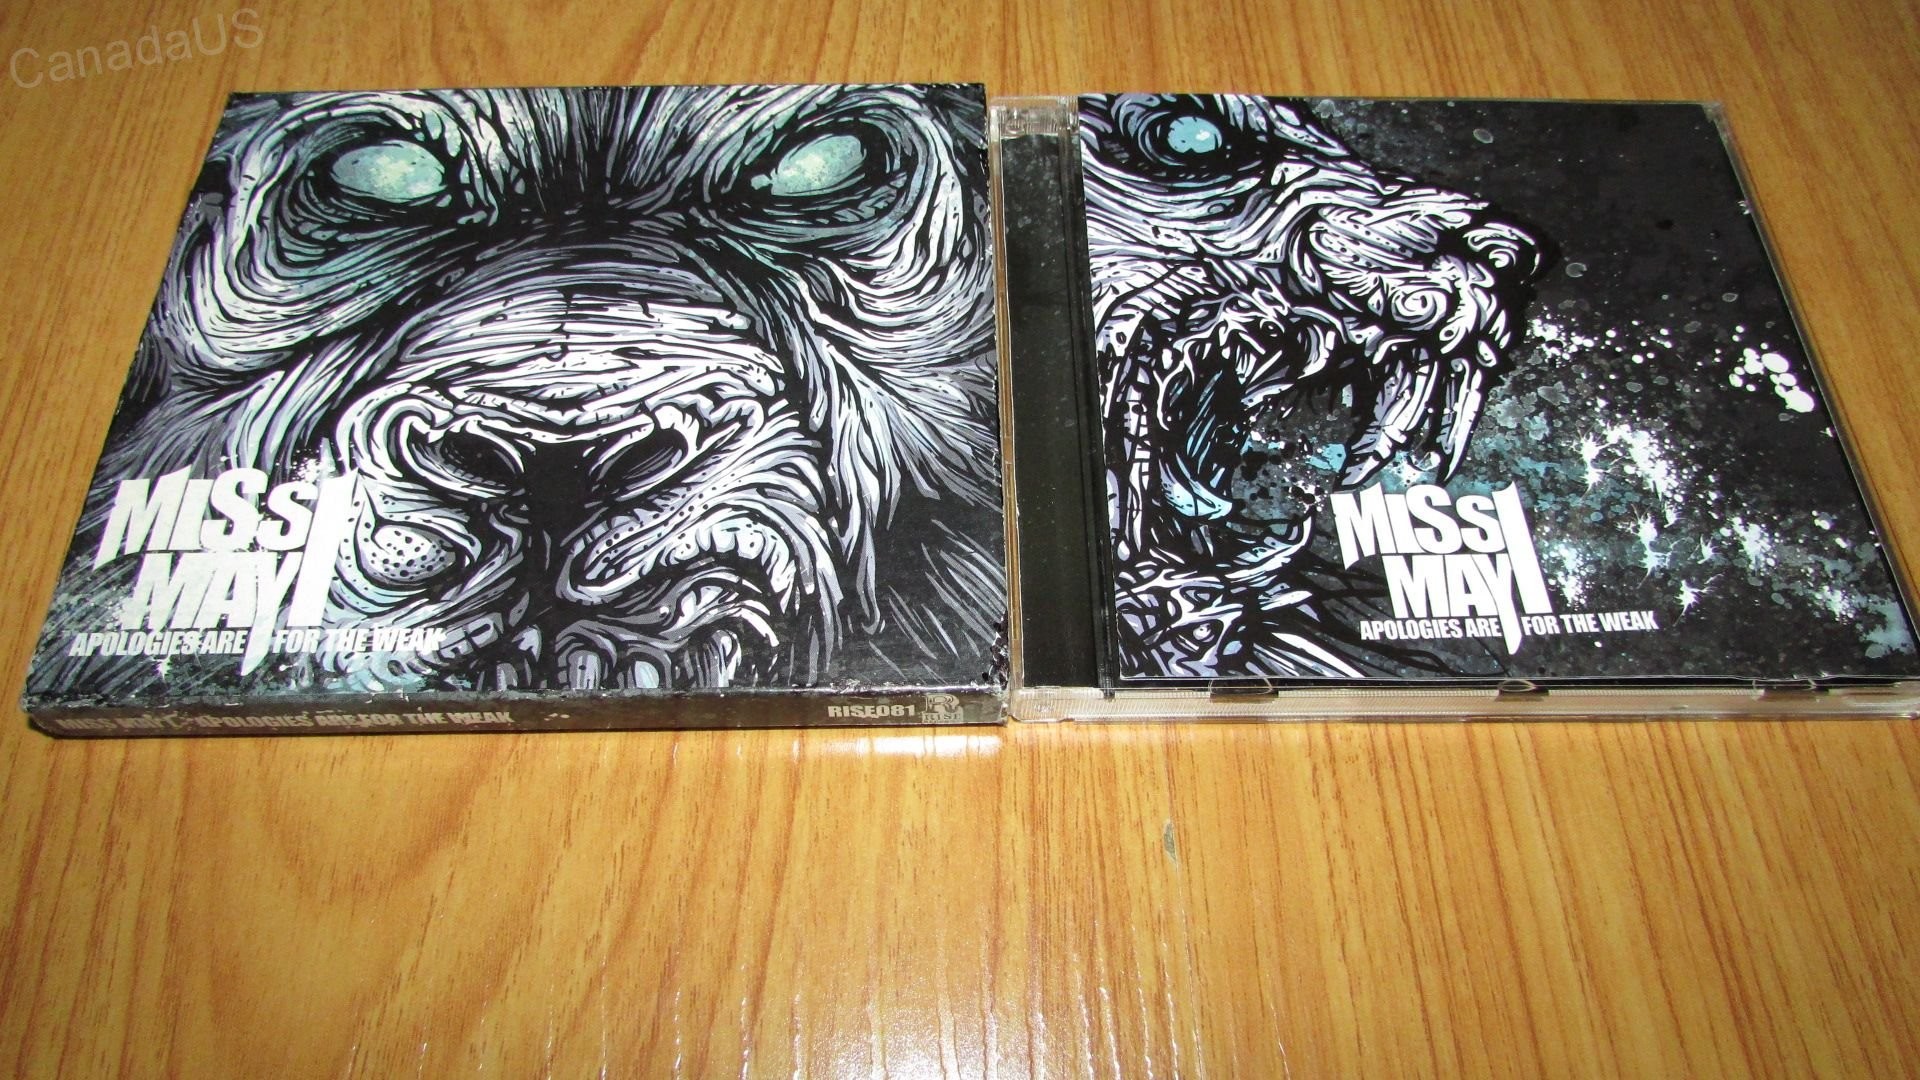 1920x1080 Miss May I – Apologies Are For The Weak - 2009 ÑÐ¸ÑÐ¼. made in USA - Slipcase